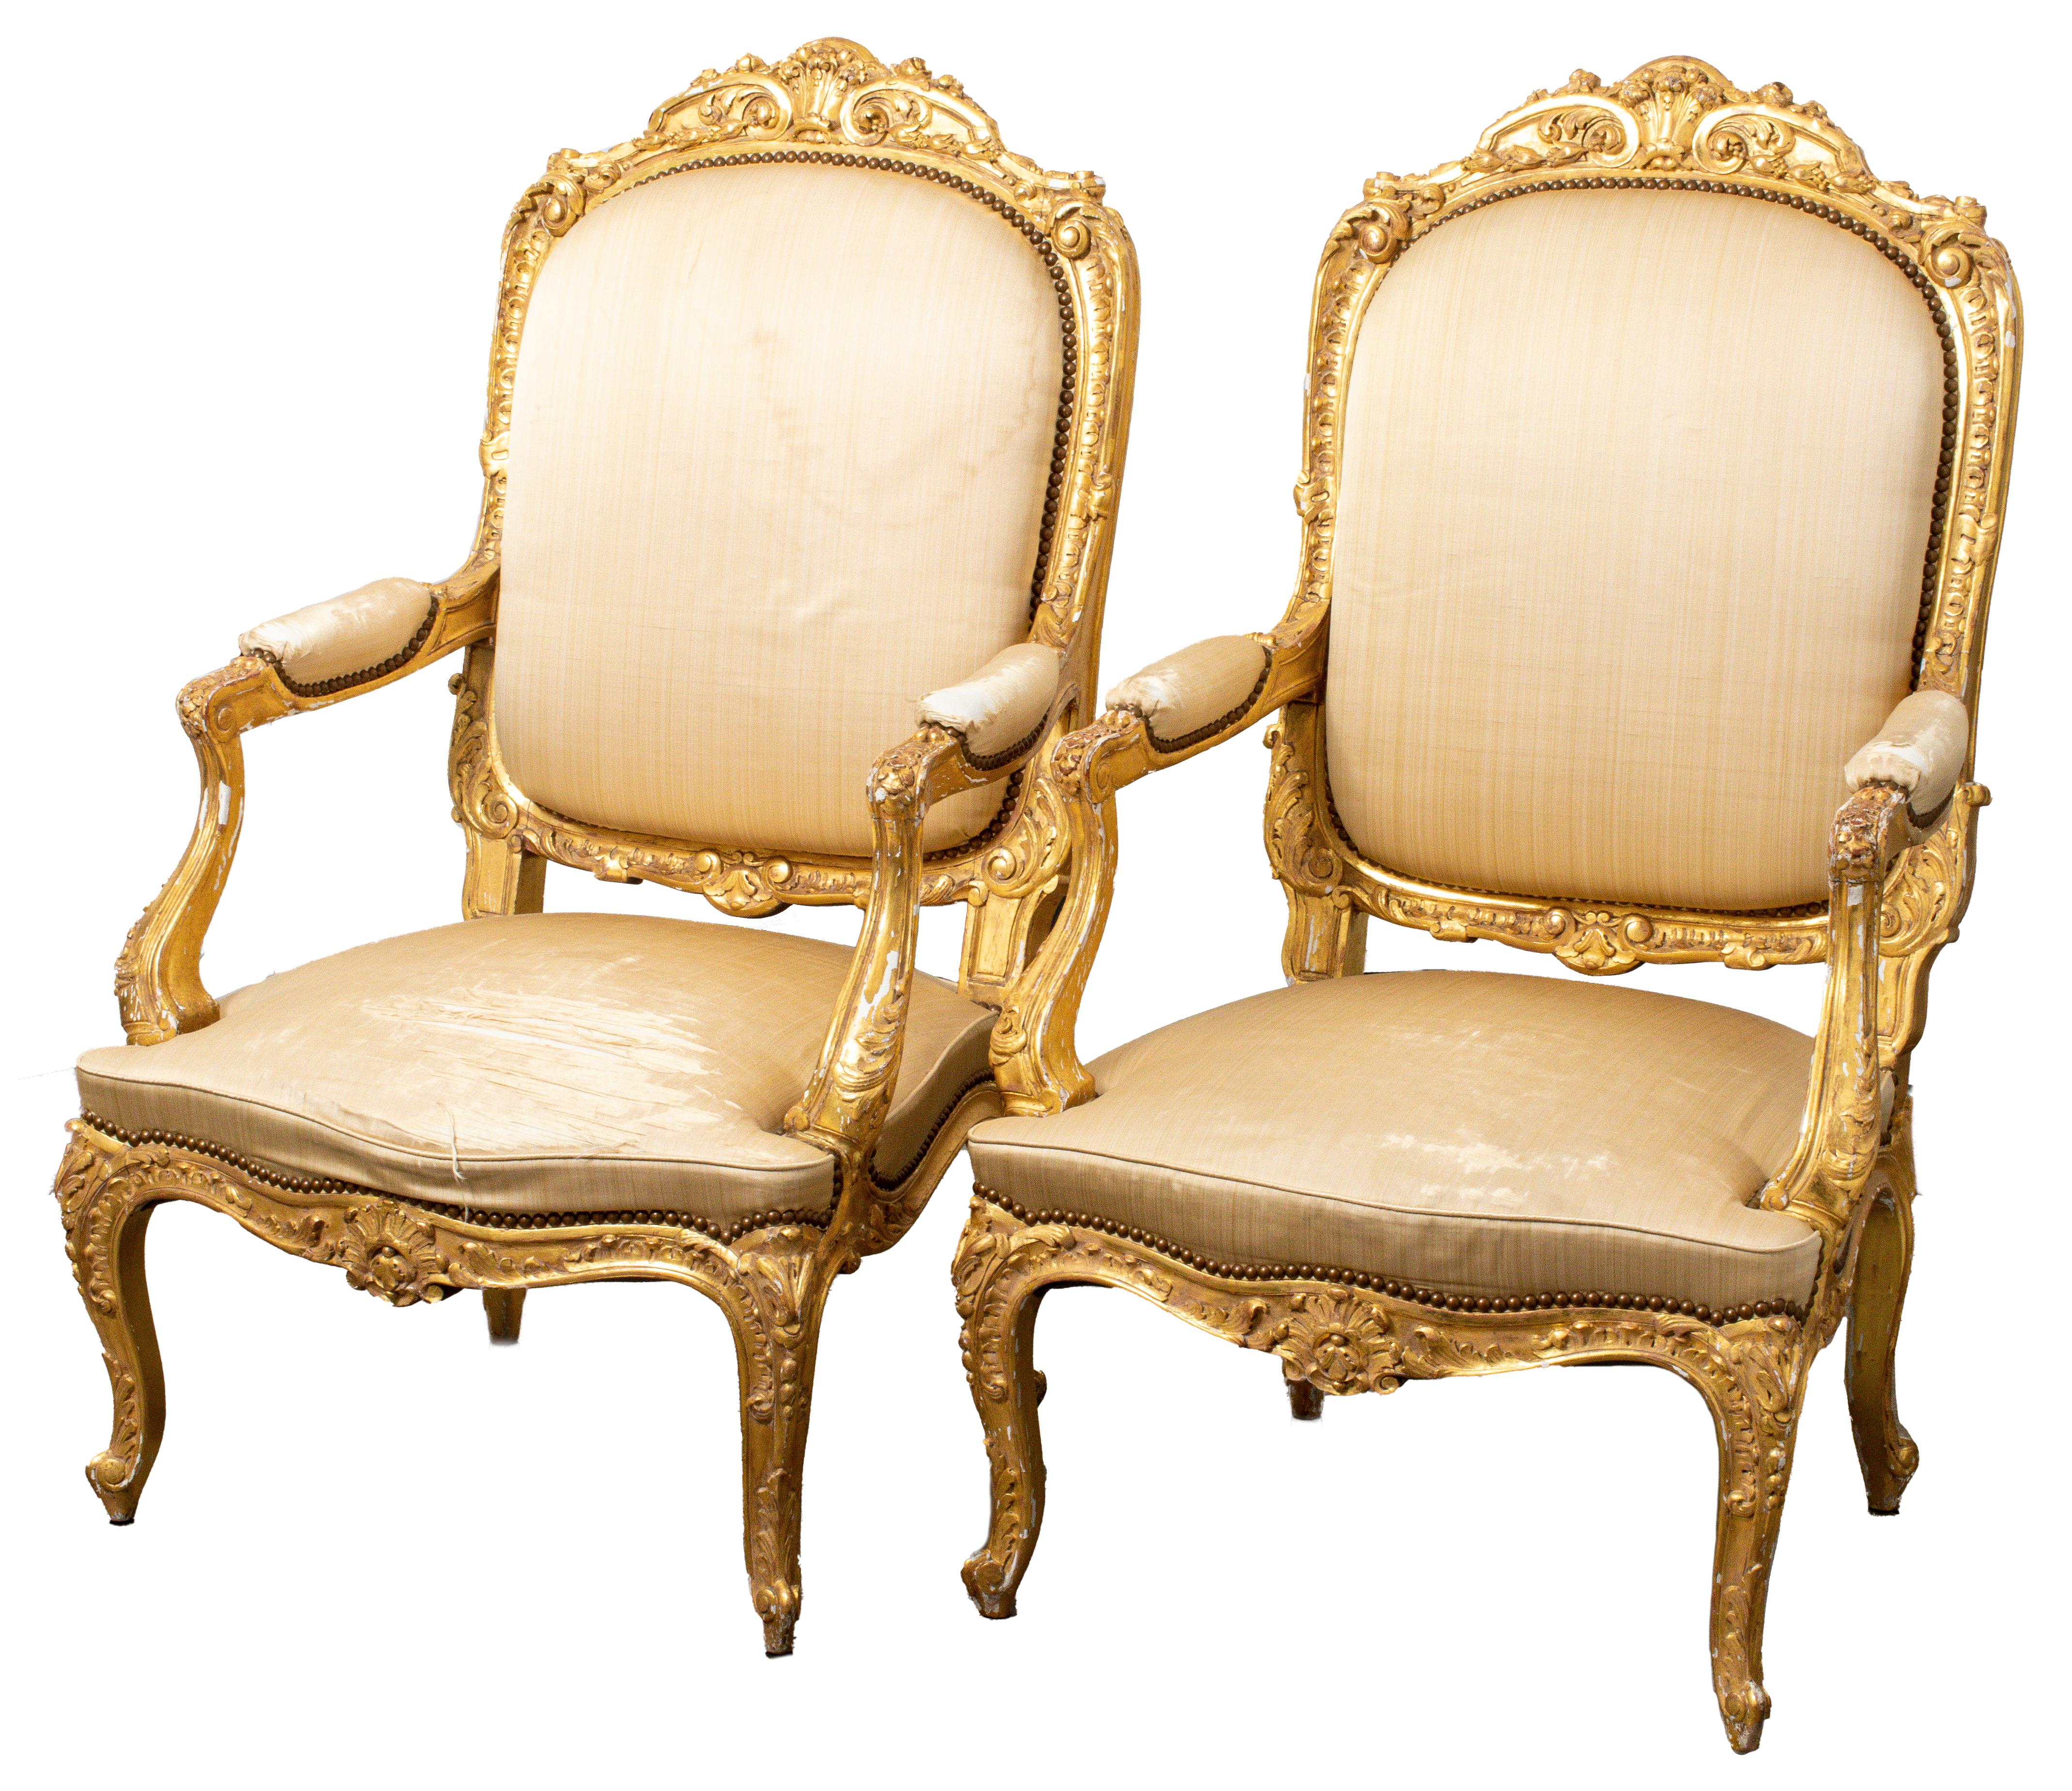 North Italian Baroque set of two giltwood armchairs / fauteuils a la reine, mid-18th century. 
Measures: 46